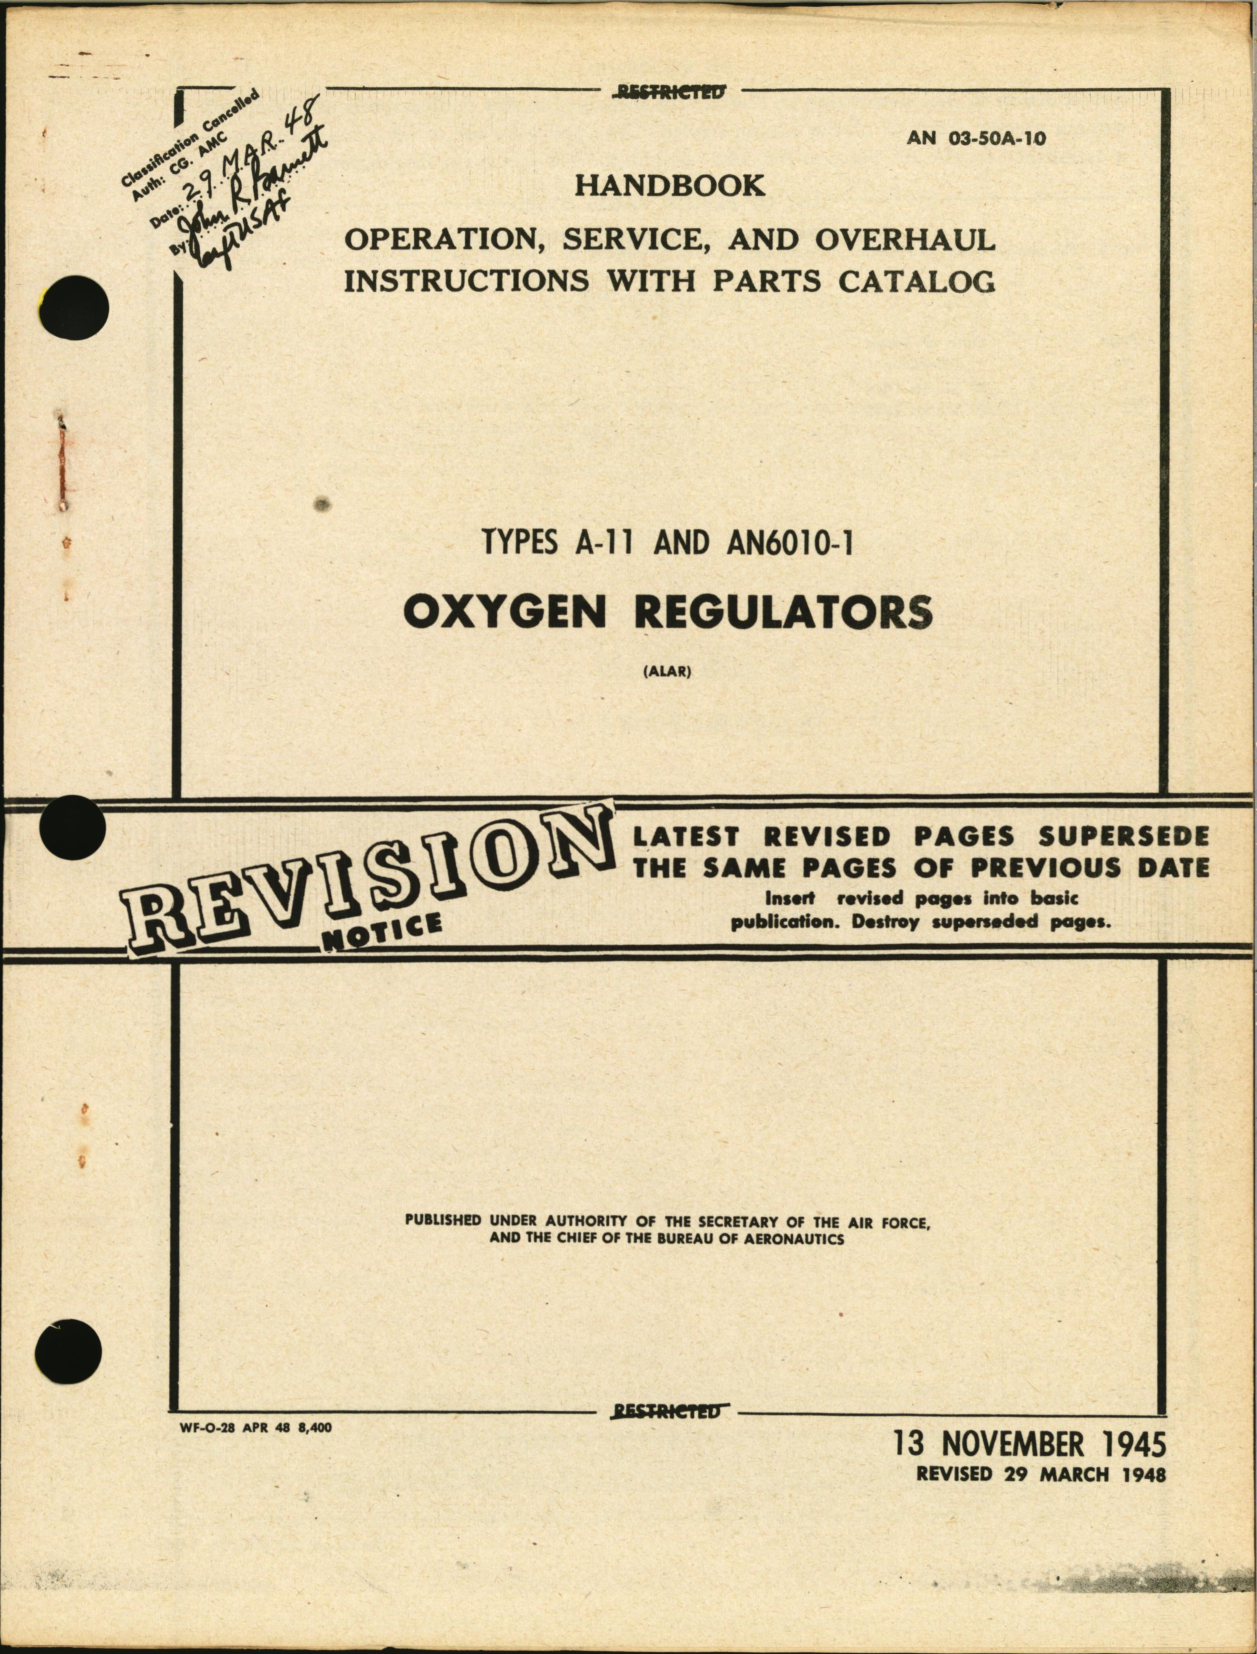 Sample page 1 from AirCorps Library document: Handbook of Operation, Service, and Overhaul Instructions with Parts Catalog for Oxygen Regulators